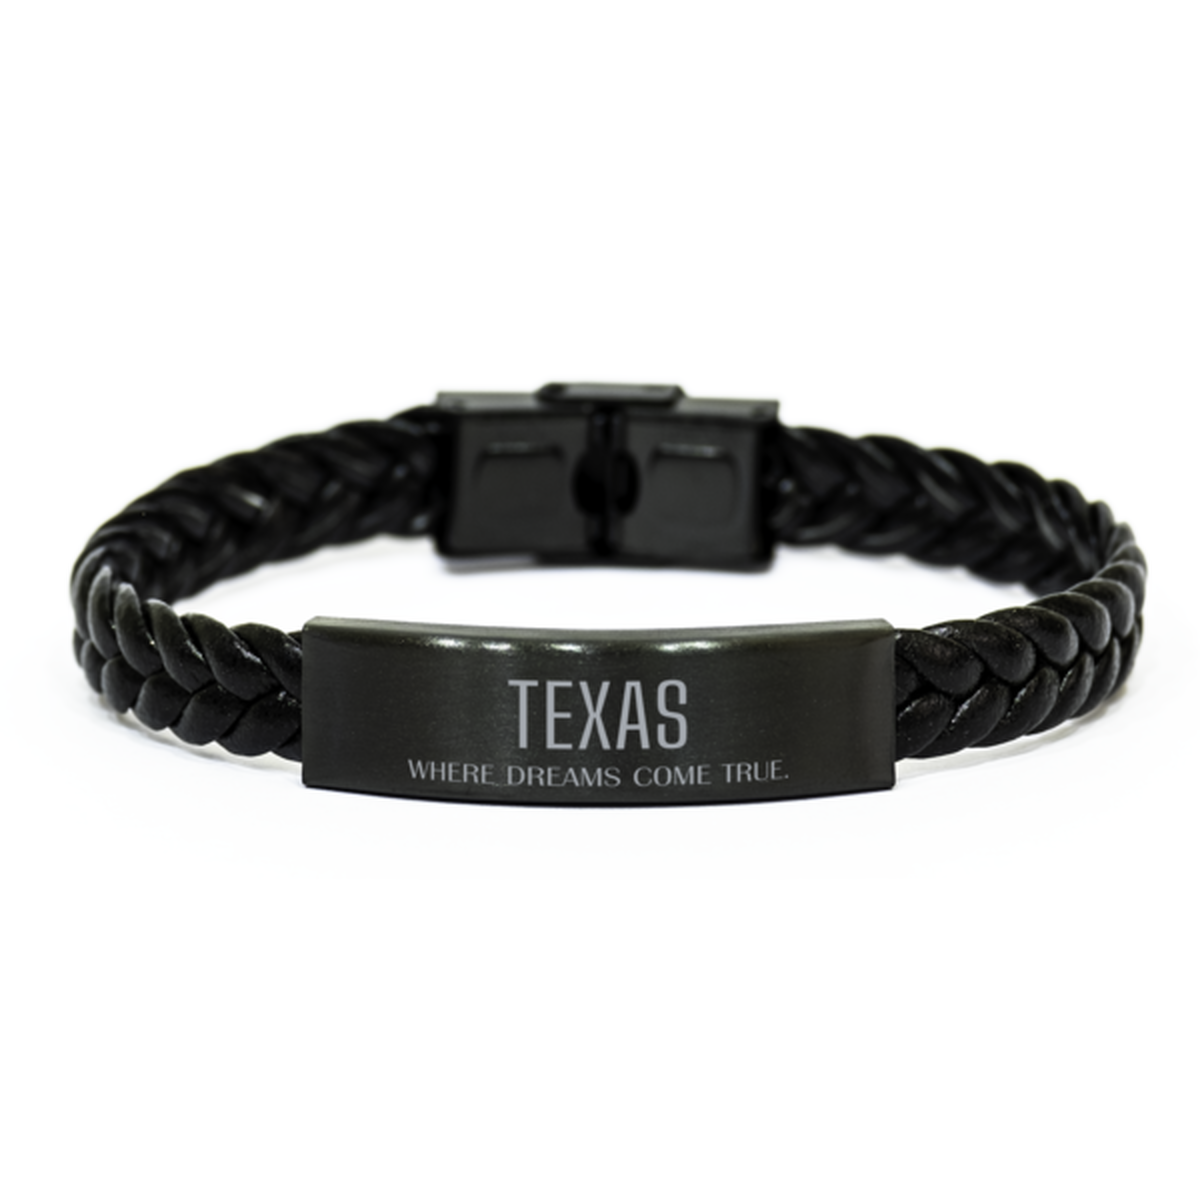 Love Texas State Braided Leather Bracelet, Texas Where dreams come true, Birthday Inspirational Gifts For Texas Men, Women, Friends